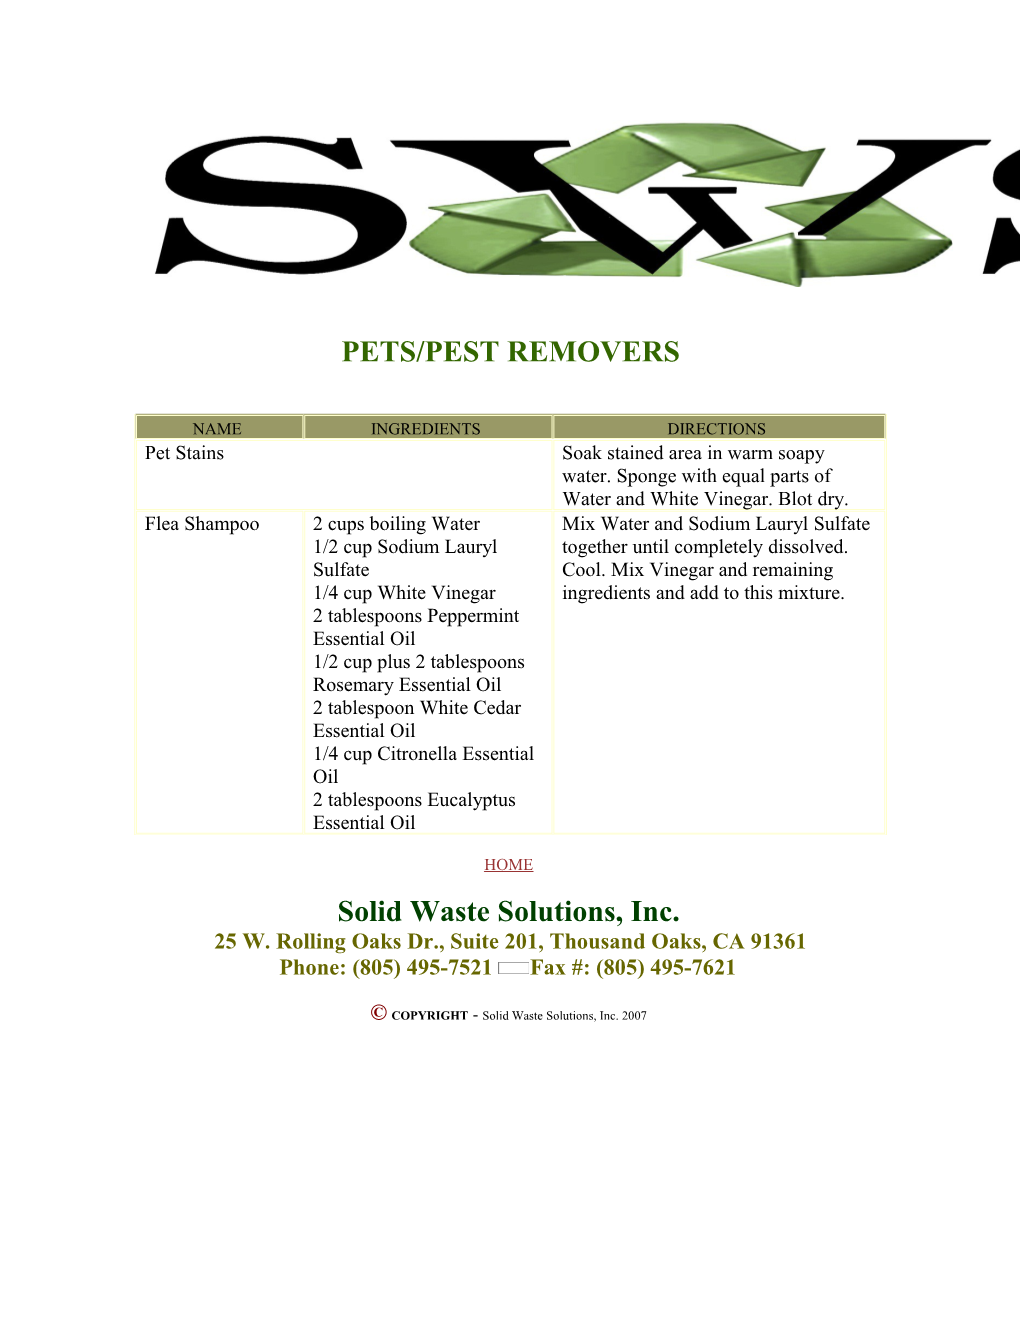 Alternative Household Products - Pets/Pest Removers